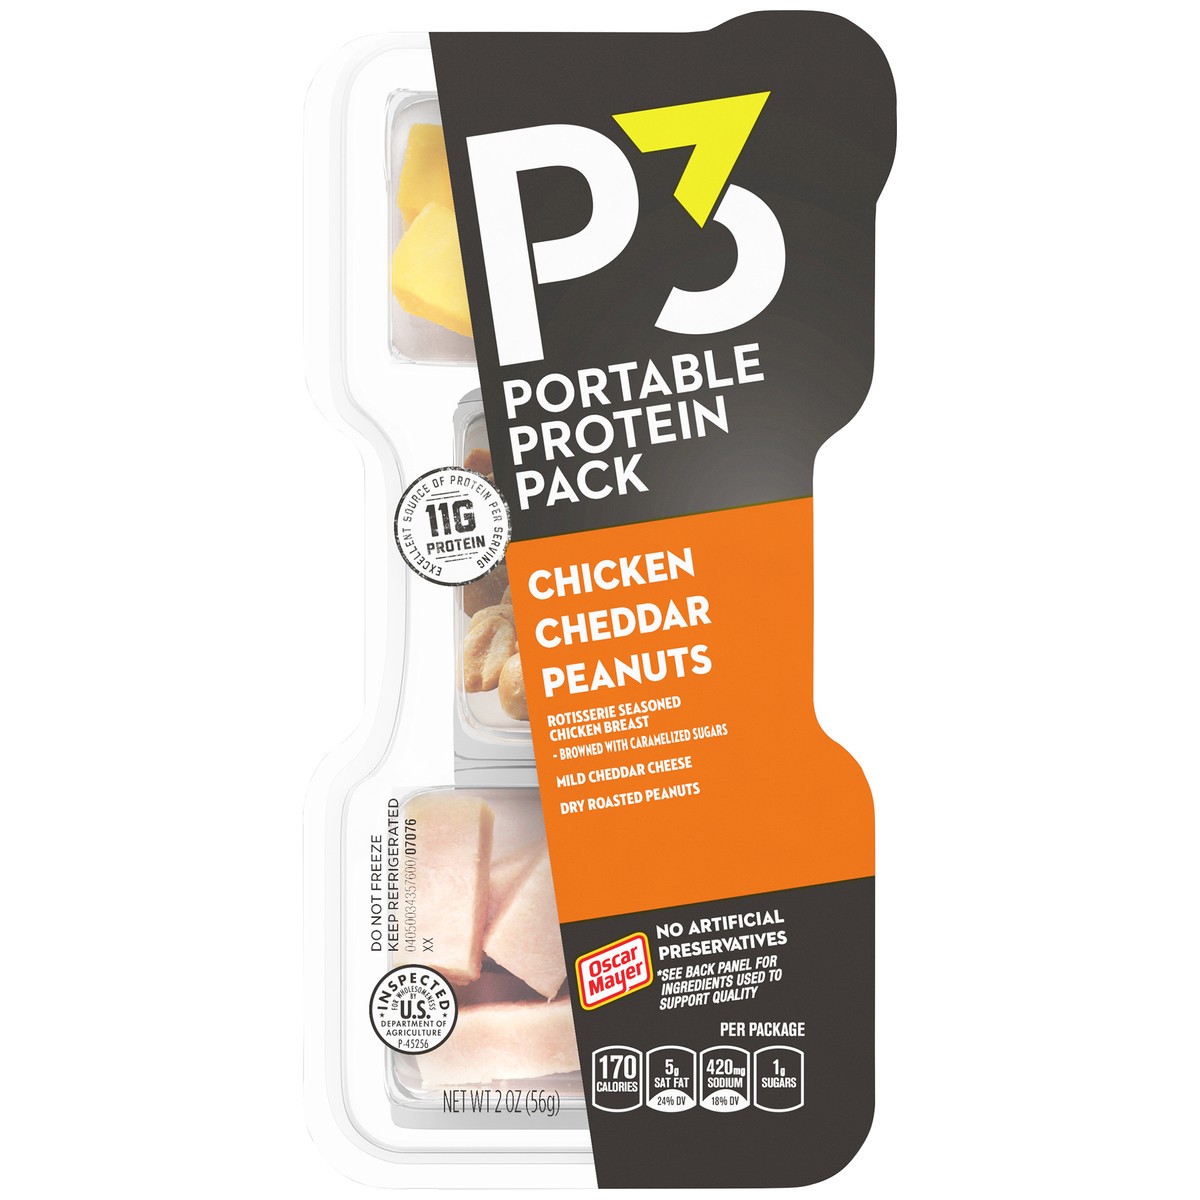 slide 6 of 9, P3 Portable Protein Snack Pack with Chicken, Peanuts & Cheddar Cheese, 2 oz Tray, 2 oz